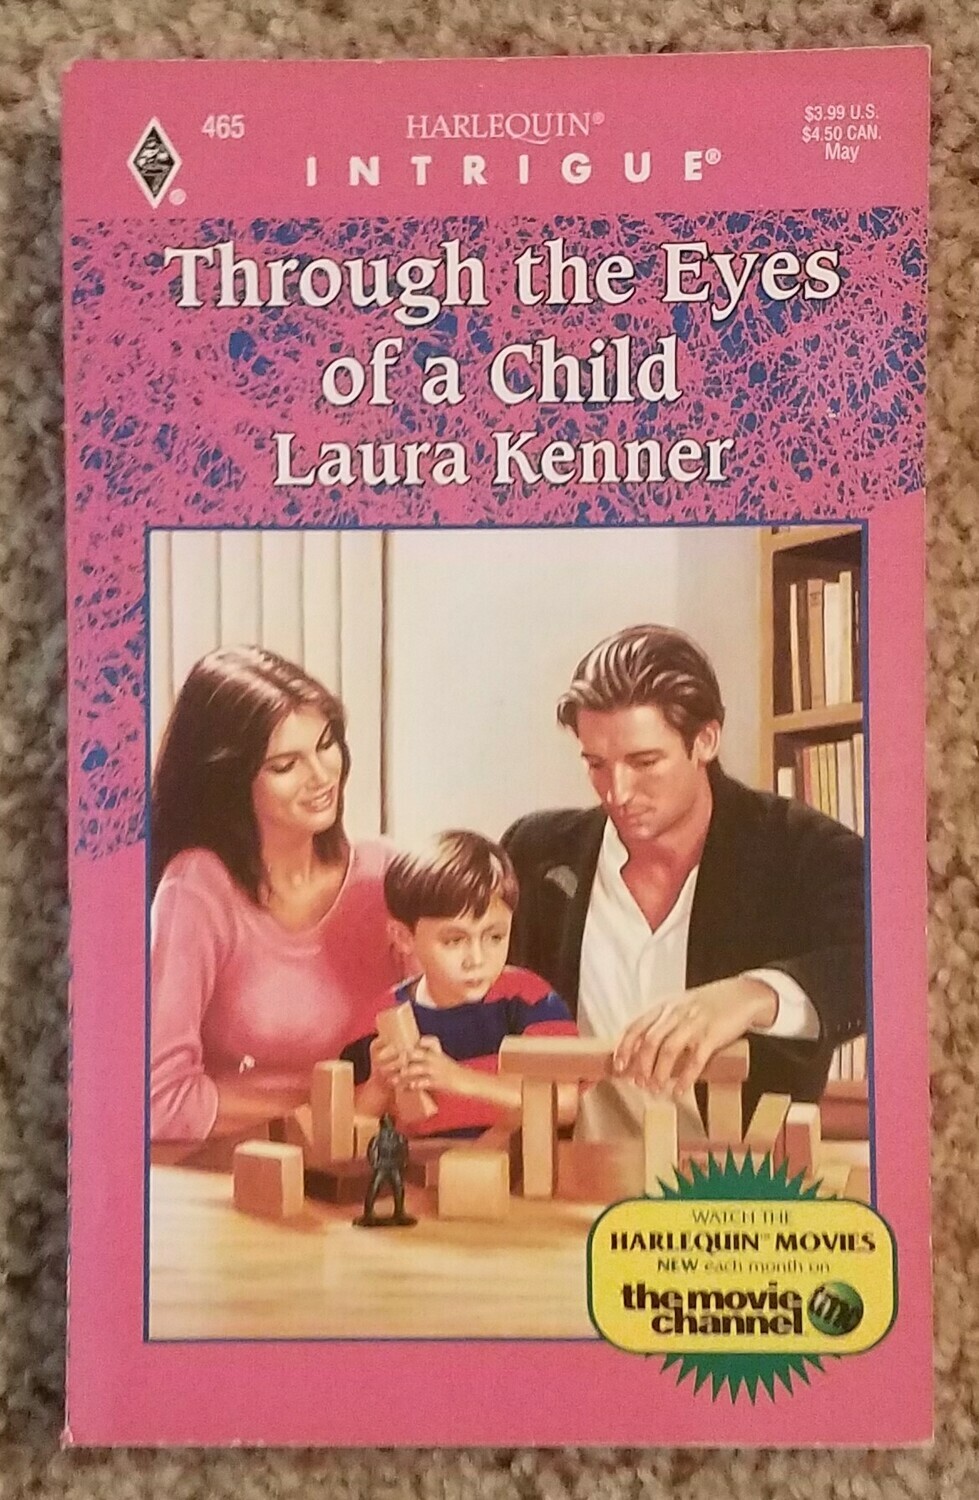 Through the Eyes of a Child by Laura Kenner